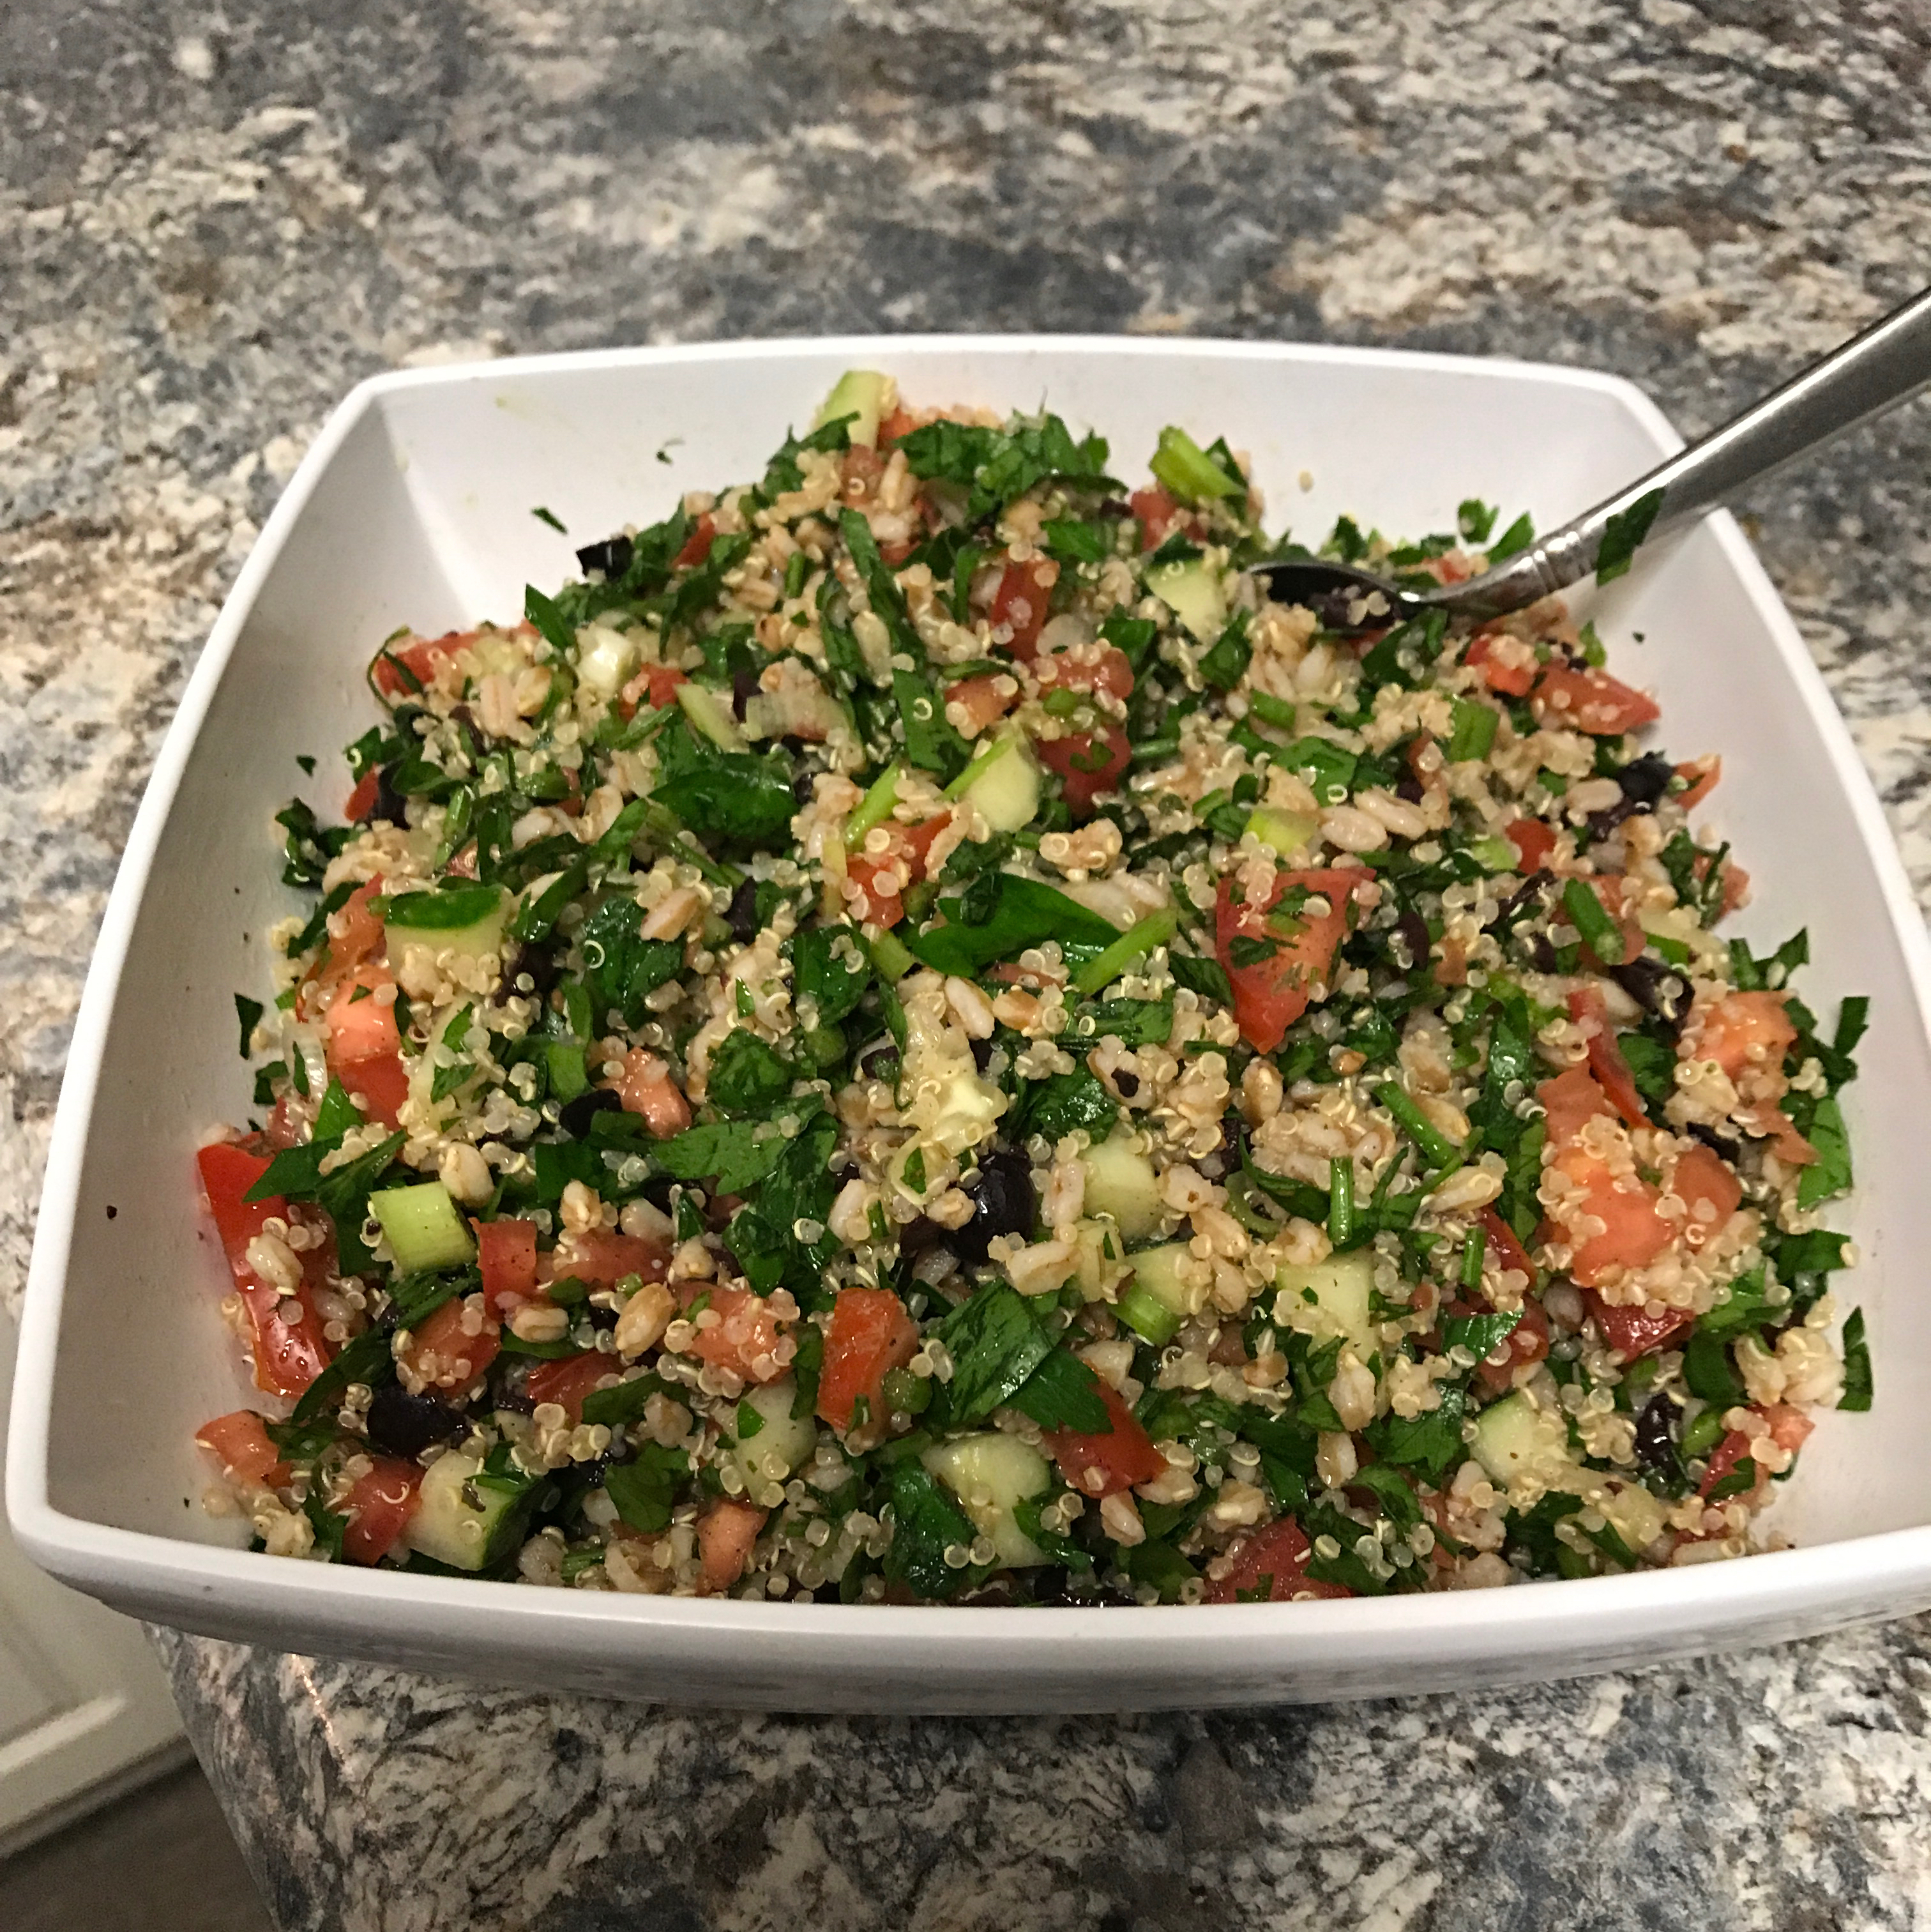 Lebanese Style Tabouli Recipe Allrecipes,Difference Between Yams And Sweet Potatoes Video